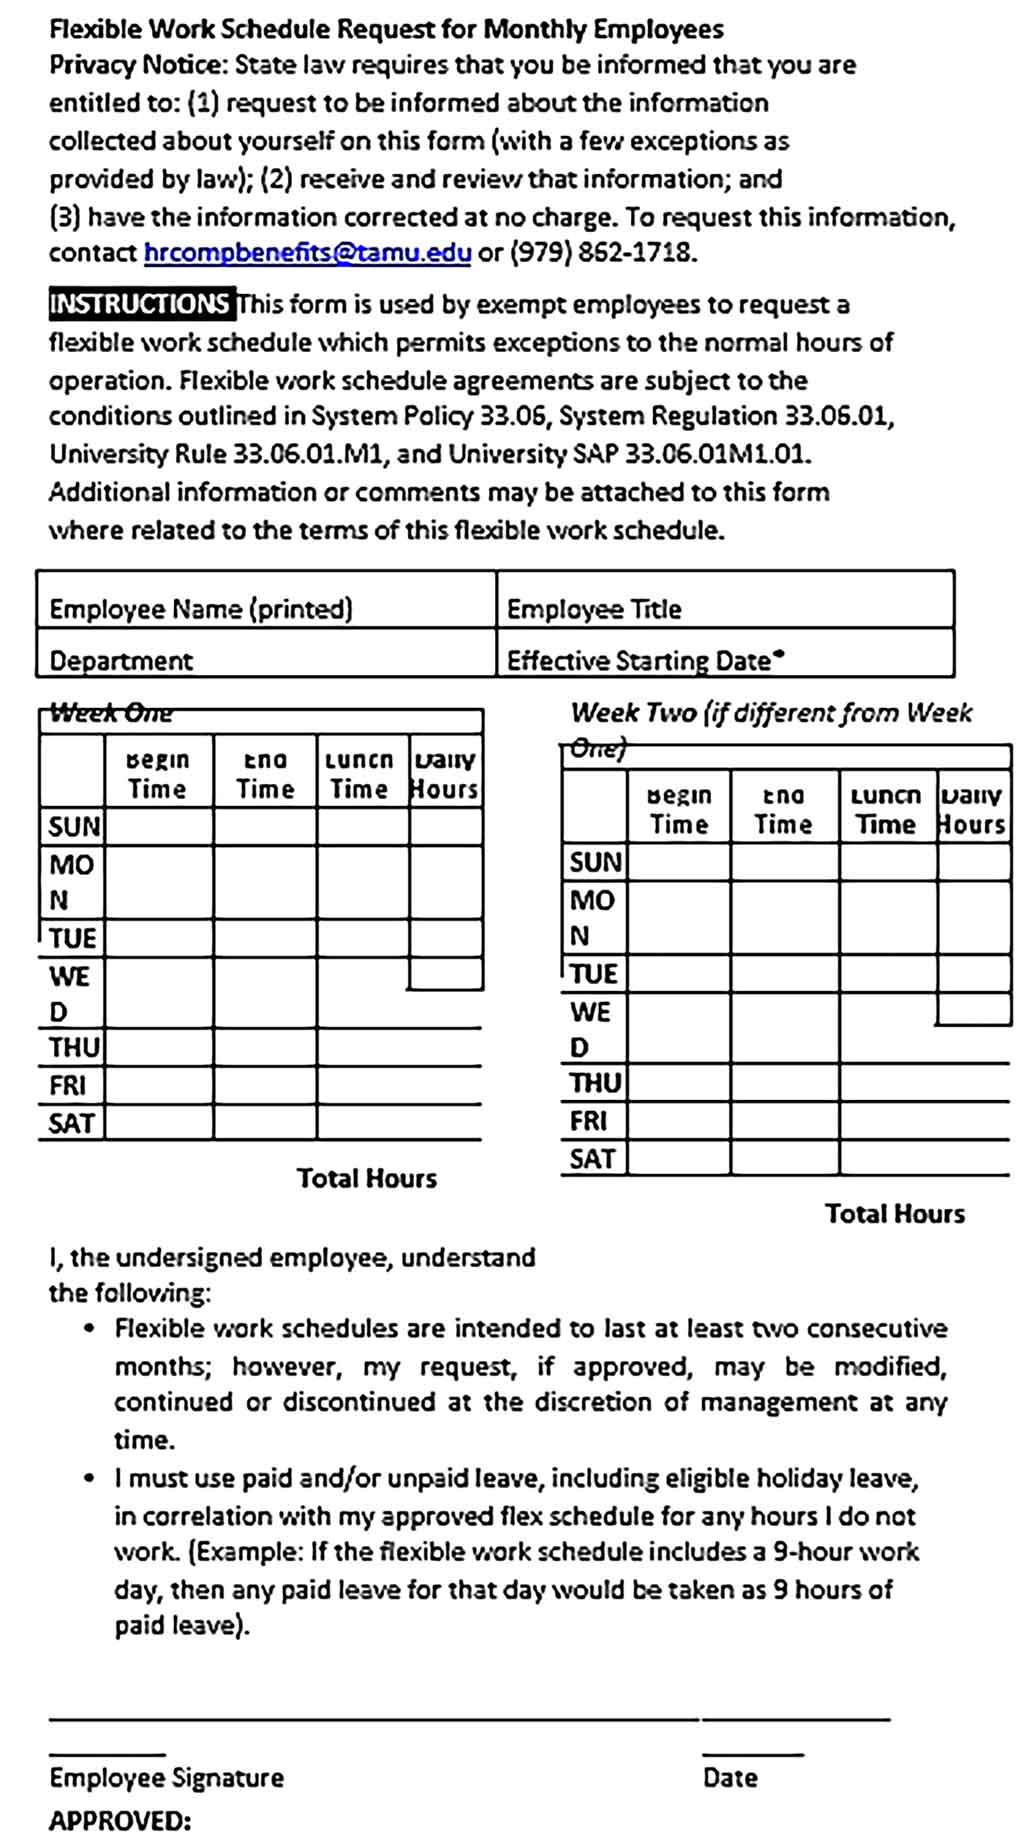 Template Flexible Work Schedule Request for Monthly Employees Sample